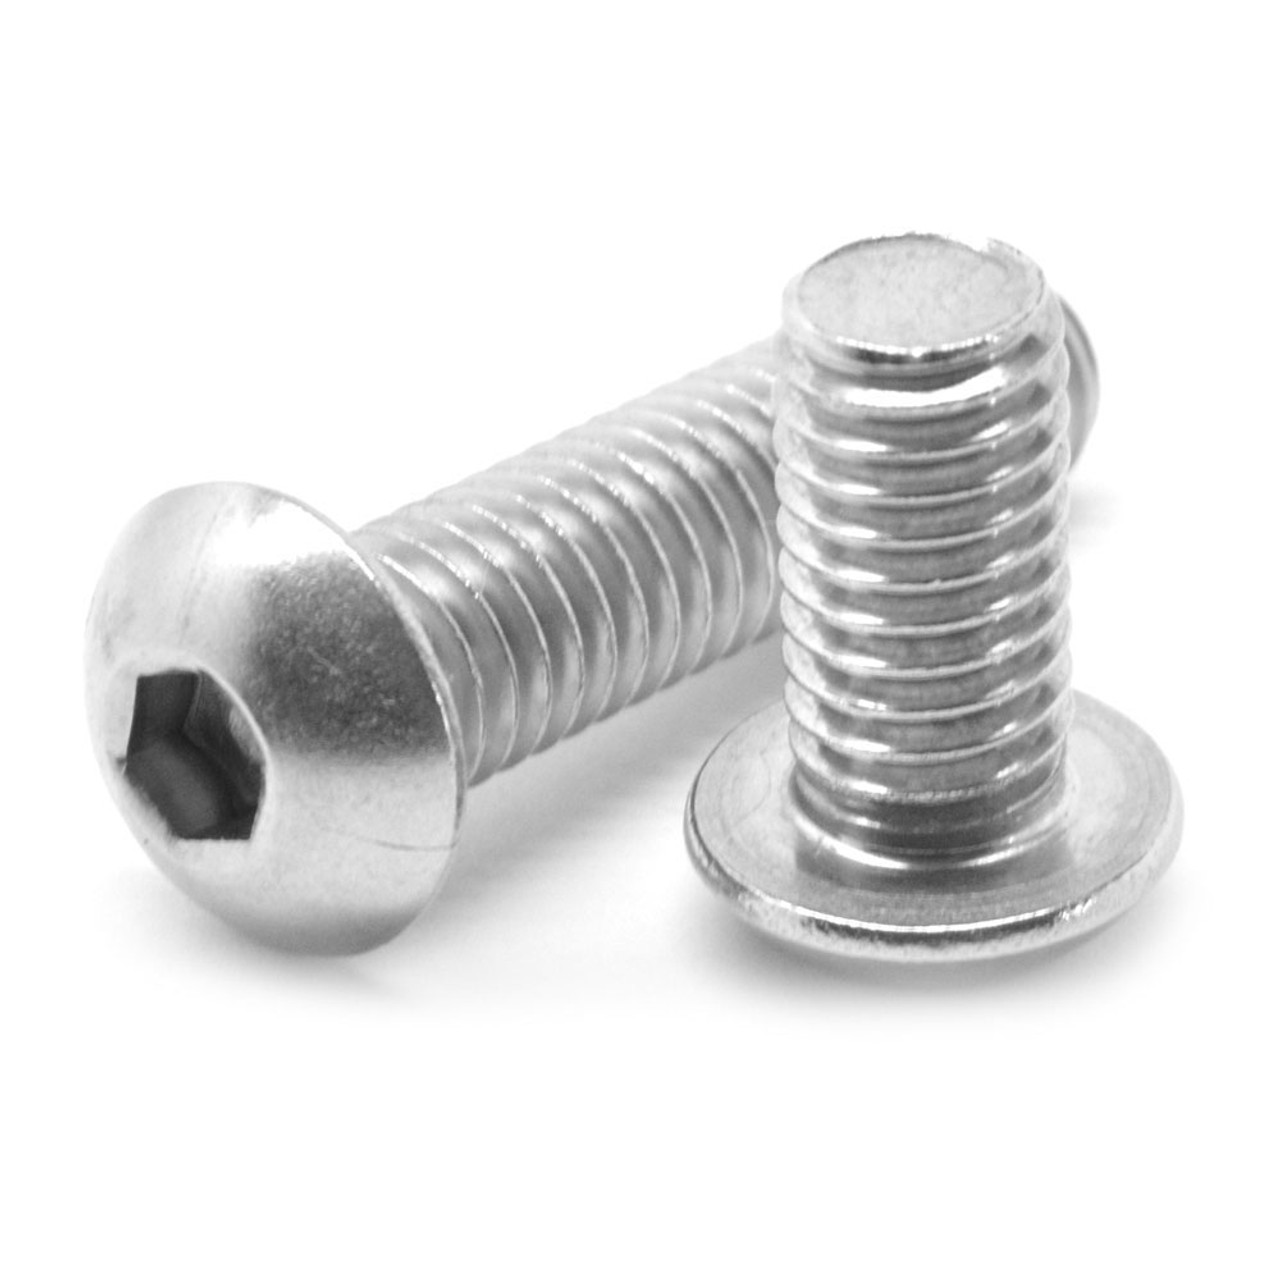 M6 x 1.00 x 45 MM (FT) Coarse Thread ISO 7380 Socket Button Head Cap Screw Stainless Steel 18-8